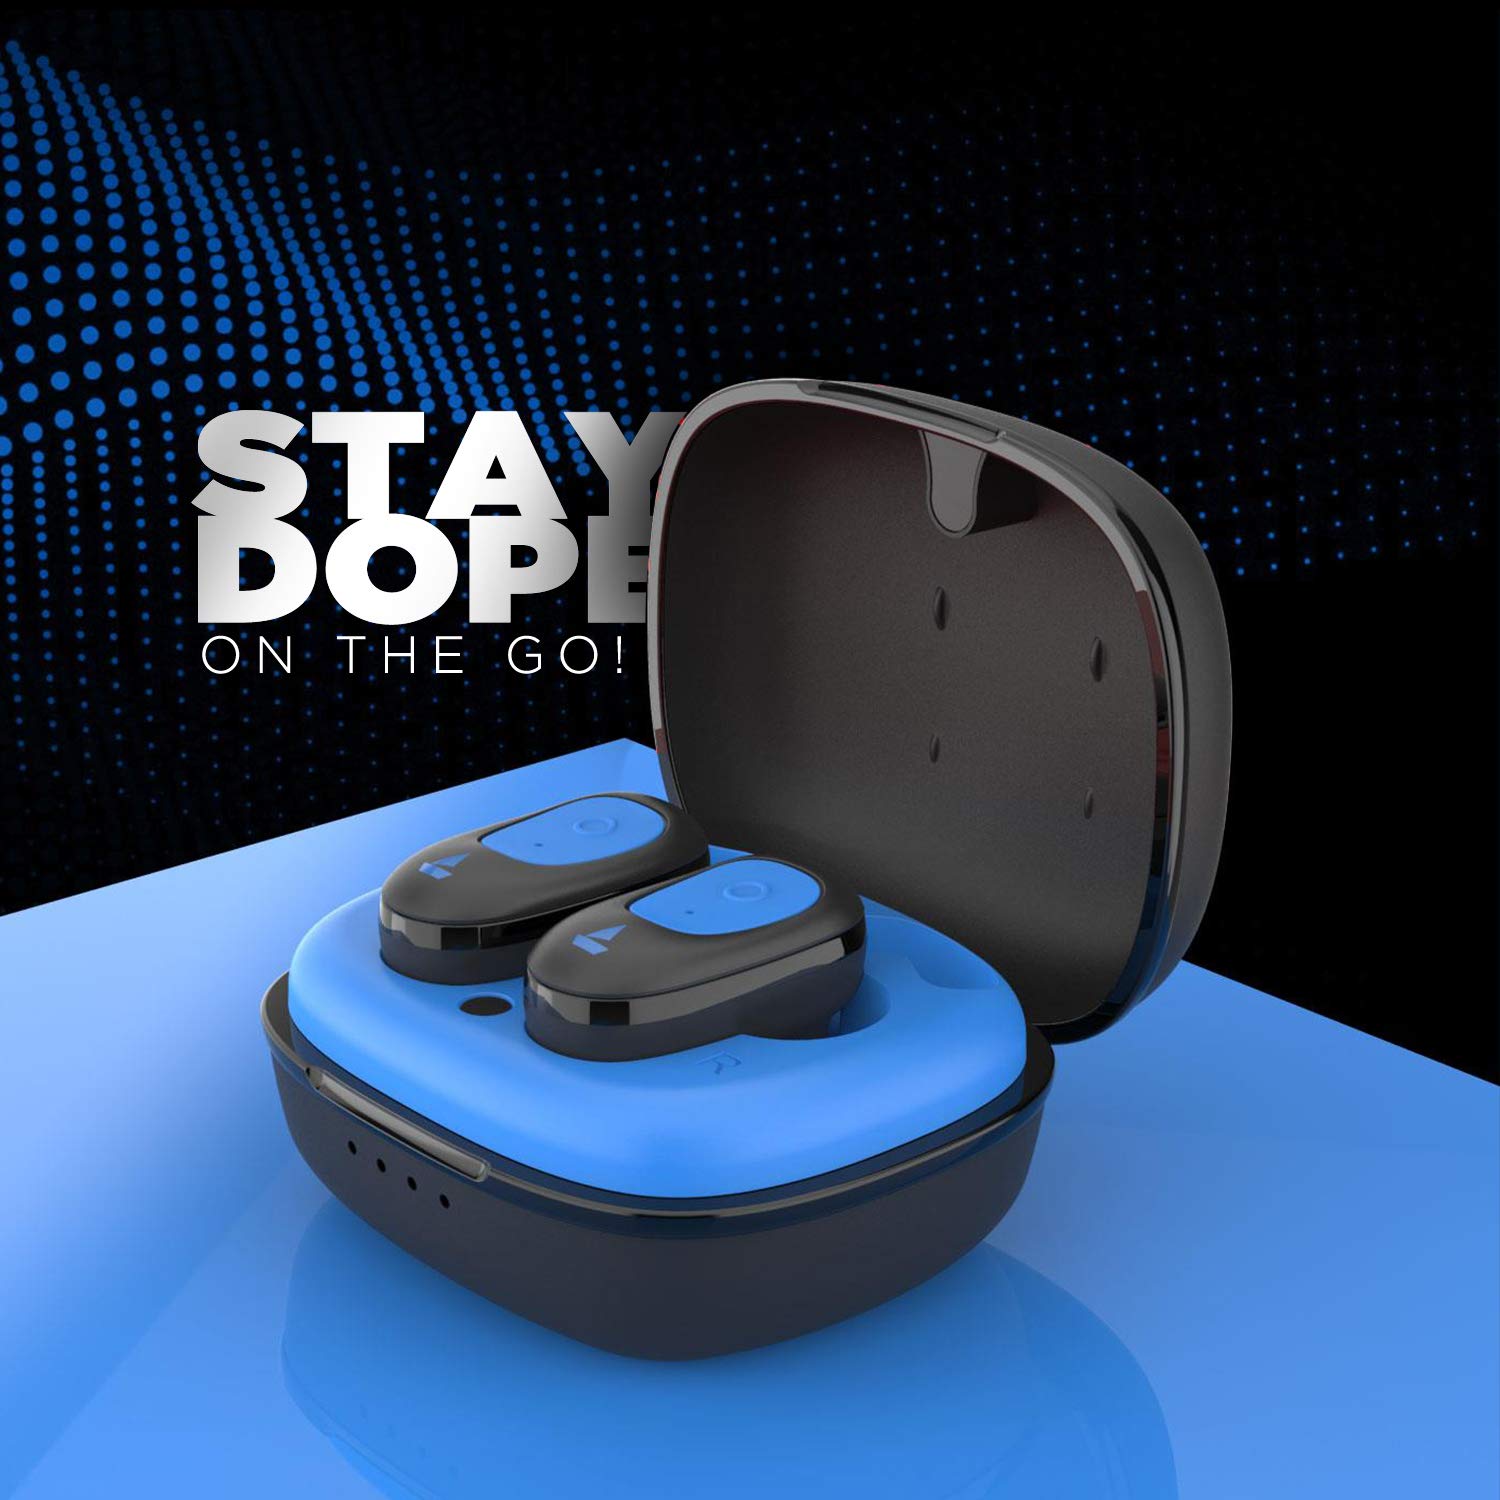 boAt Airdopes 201 True Wireless Earbuds with BT v5.0, IPX 4 Sweat and Water Resistance, in-Built Mic with Voice Assistant